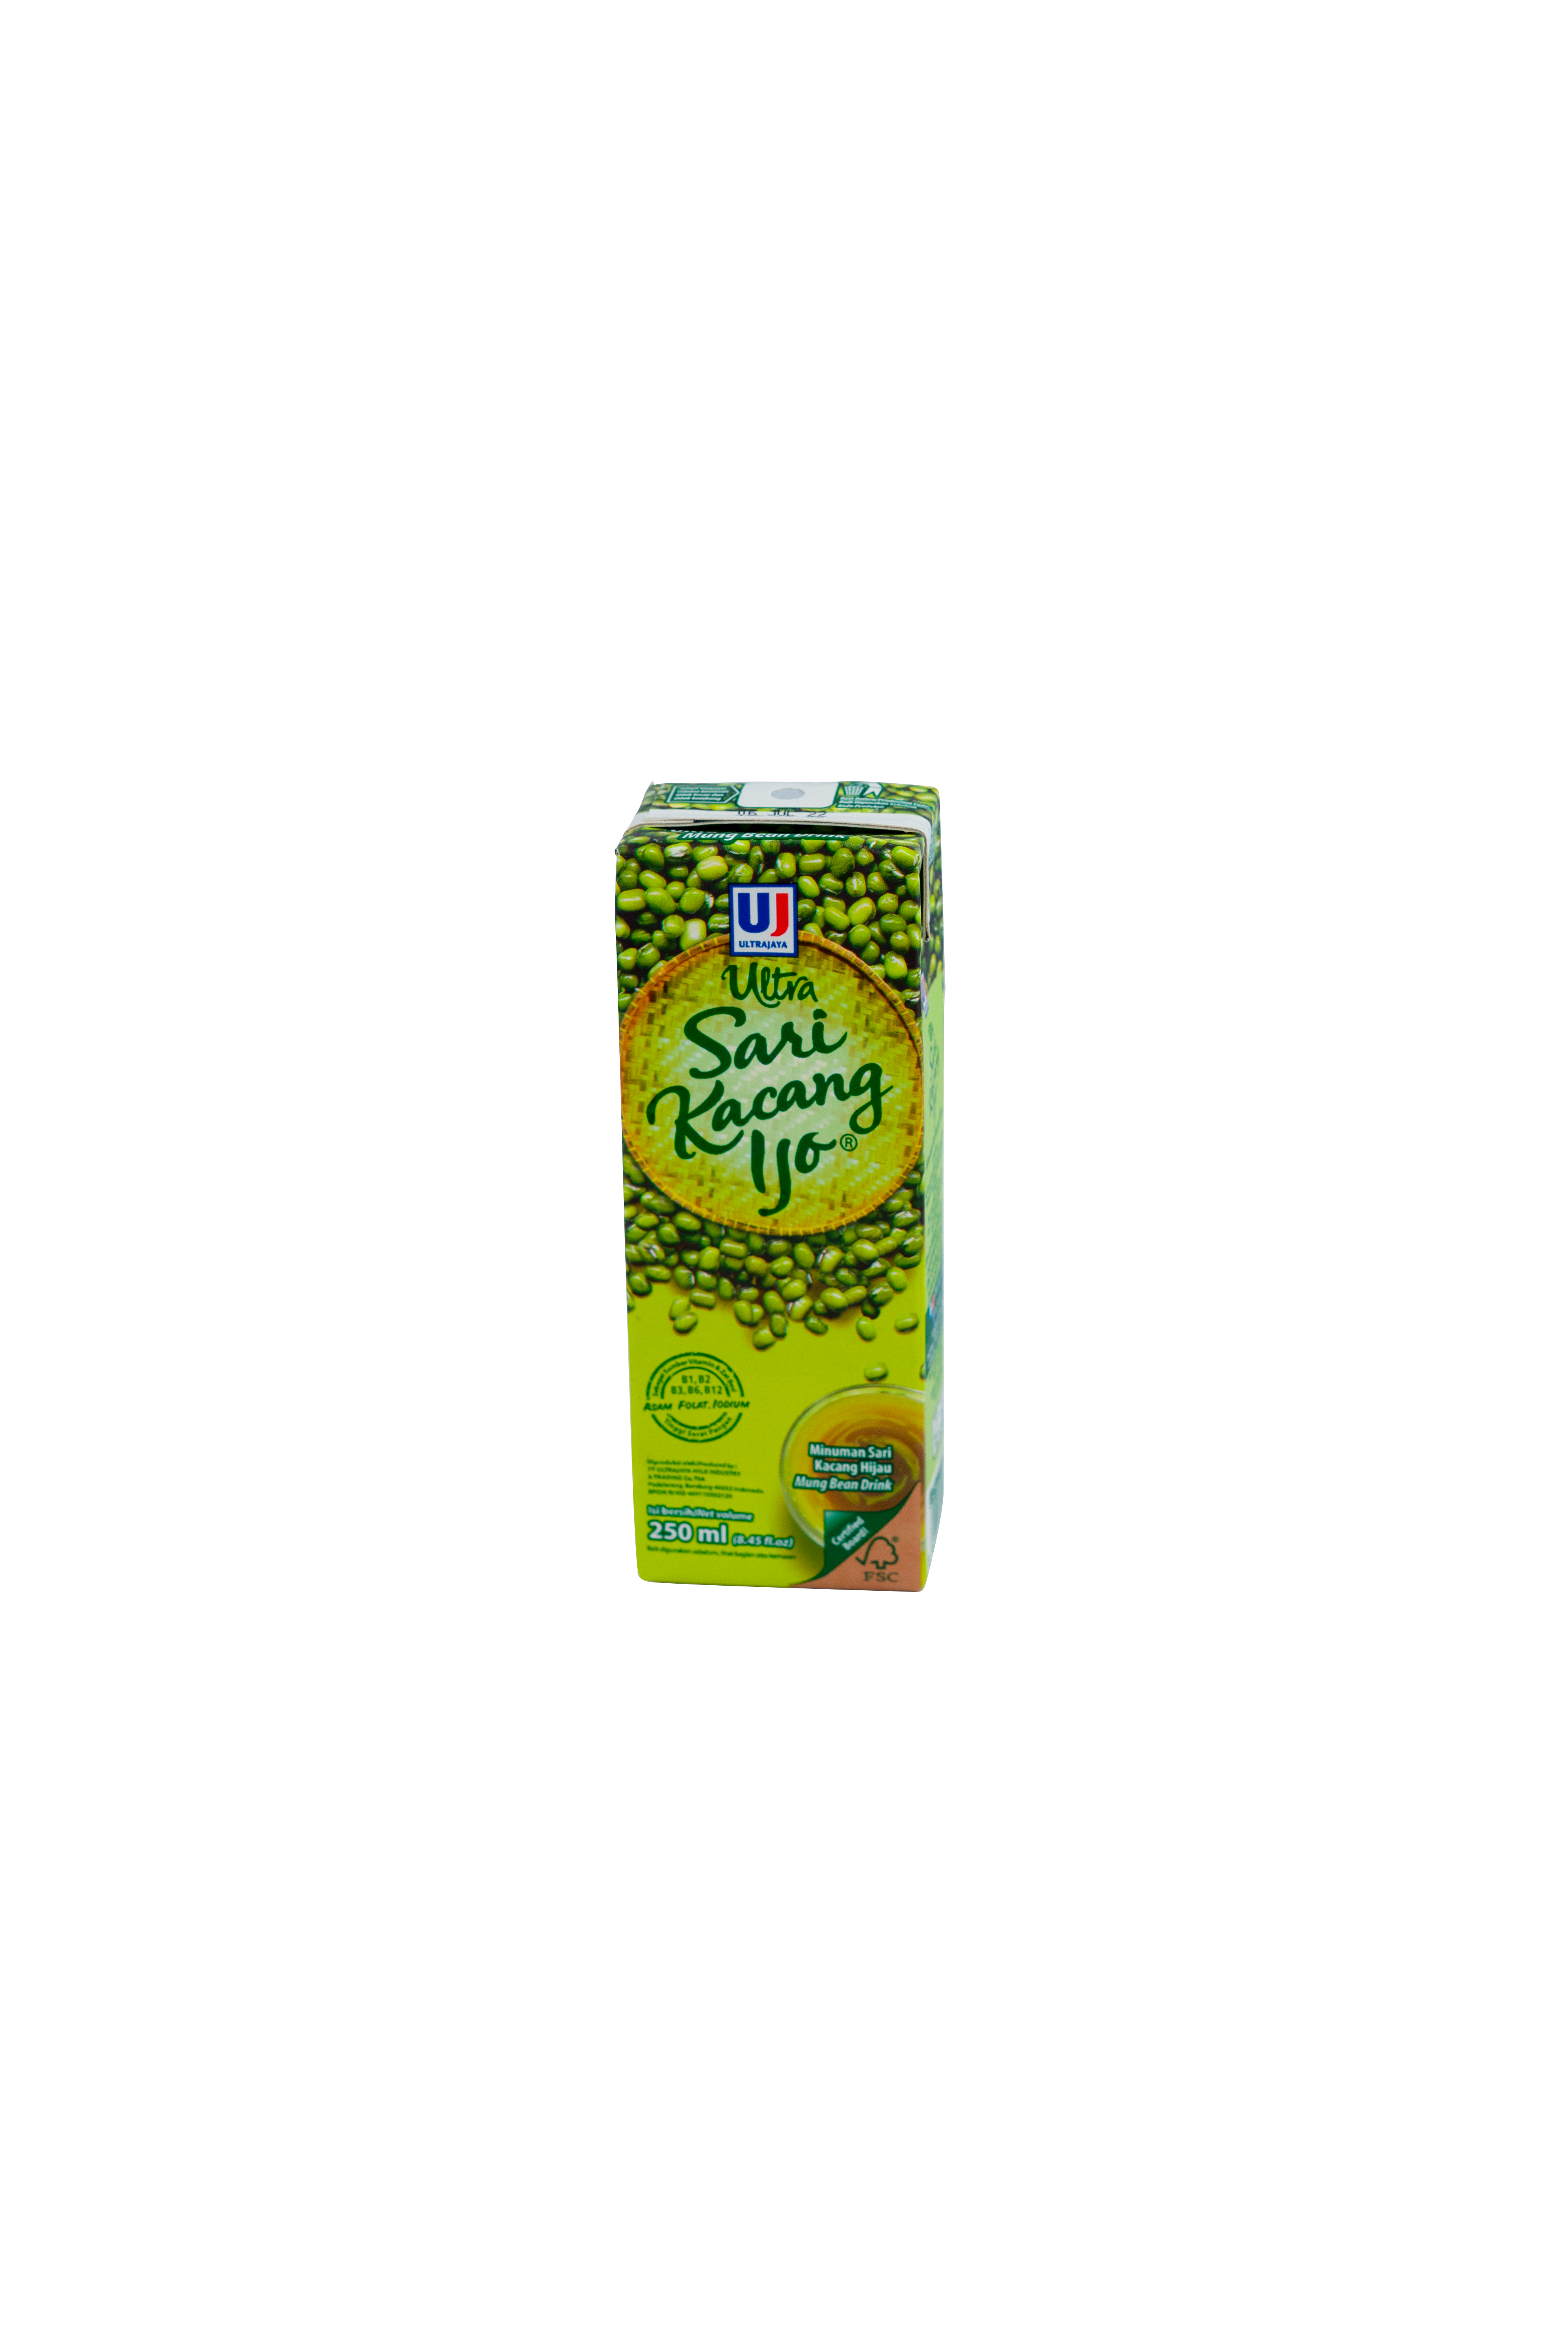 Image Product Indonesia Famous Drink